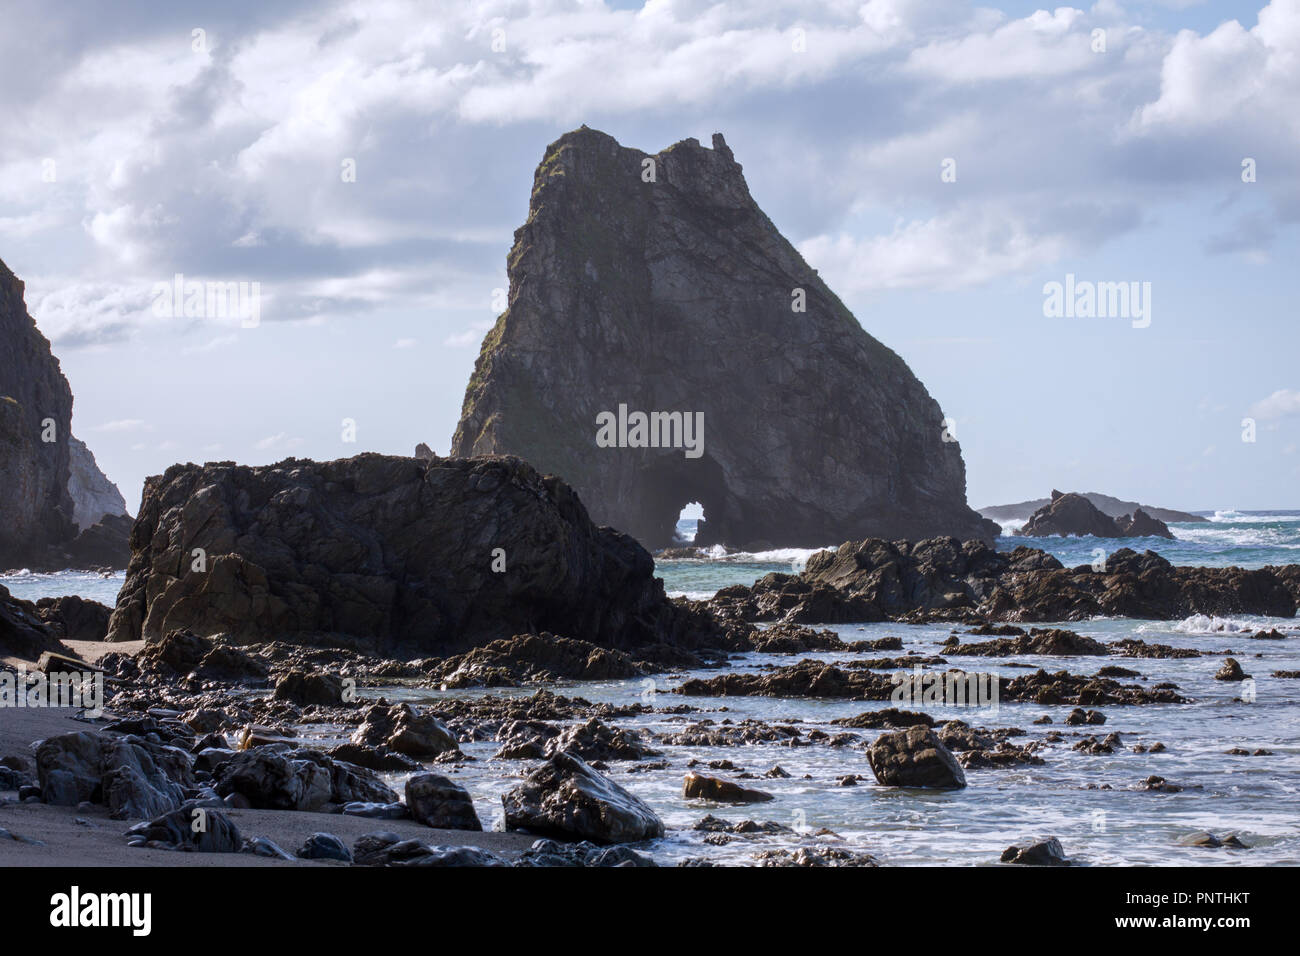 Asturias, Spain. View from the beach of a mysterious dark island with a cave in it. Stock Photo